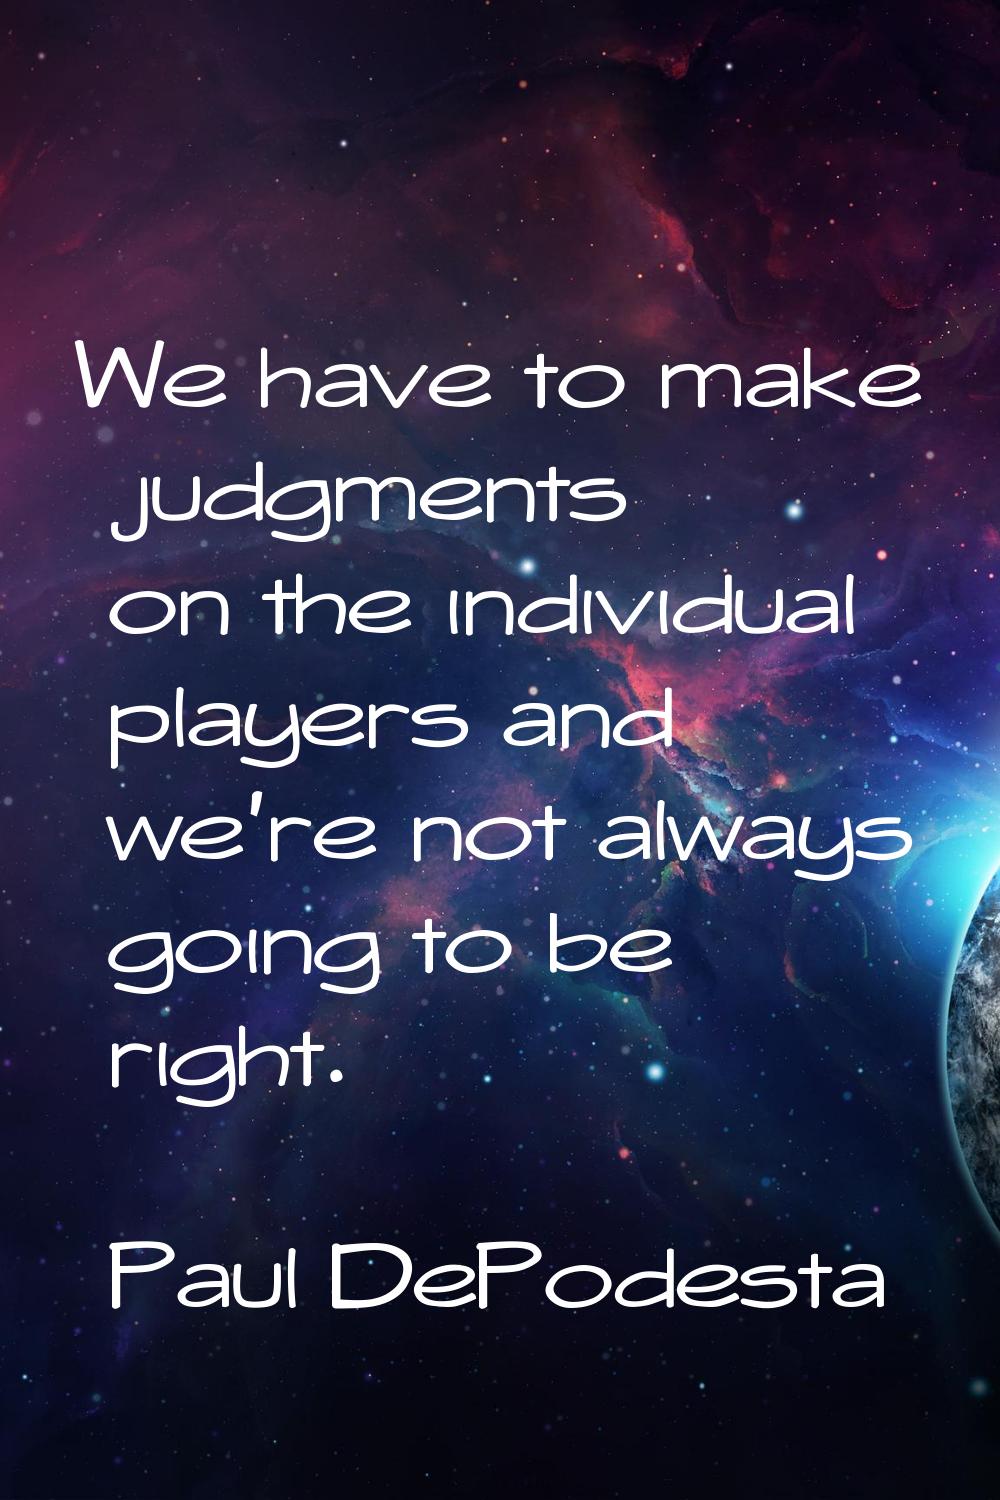 We have to make judgments on the individual players and we're not always going to be right.